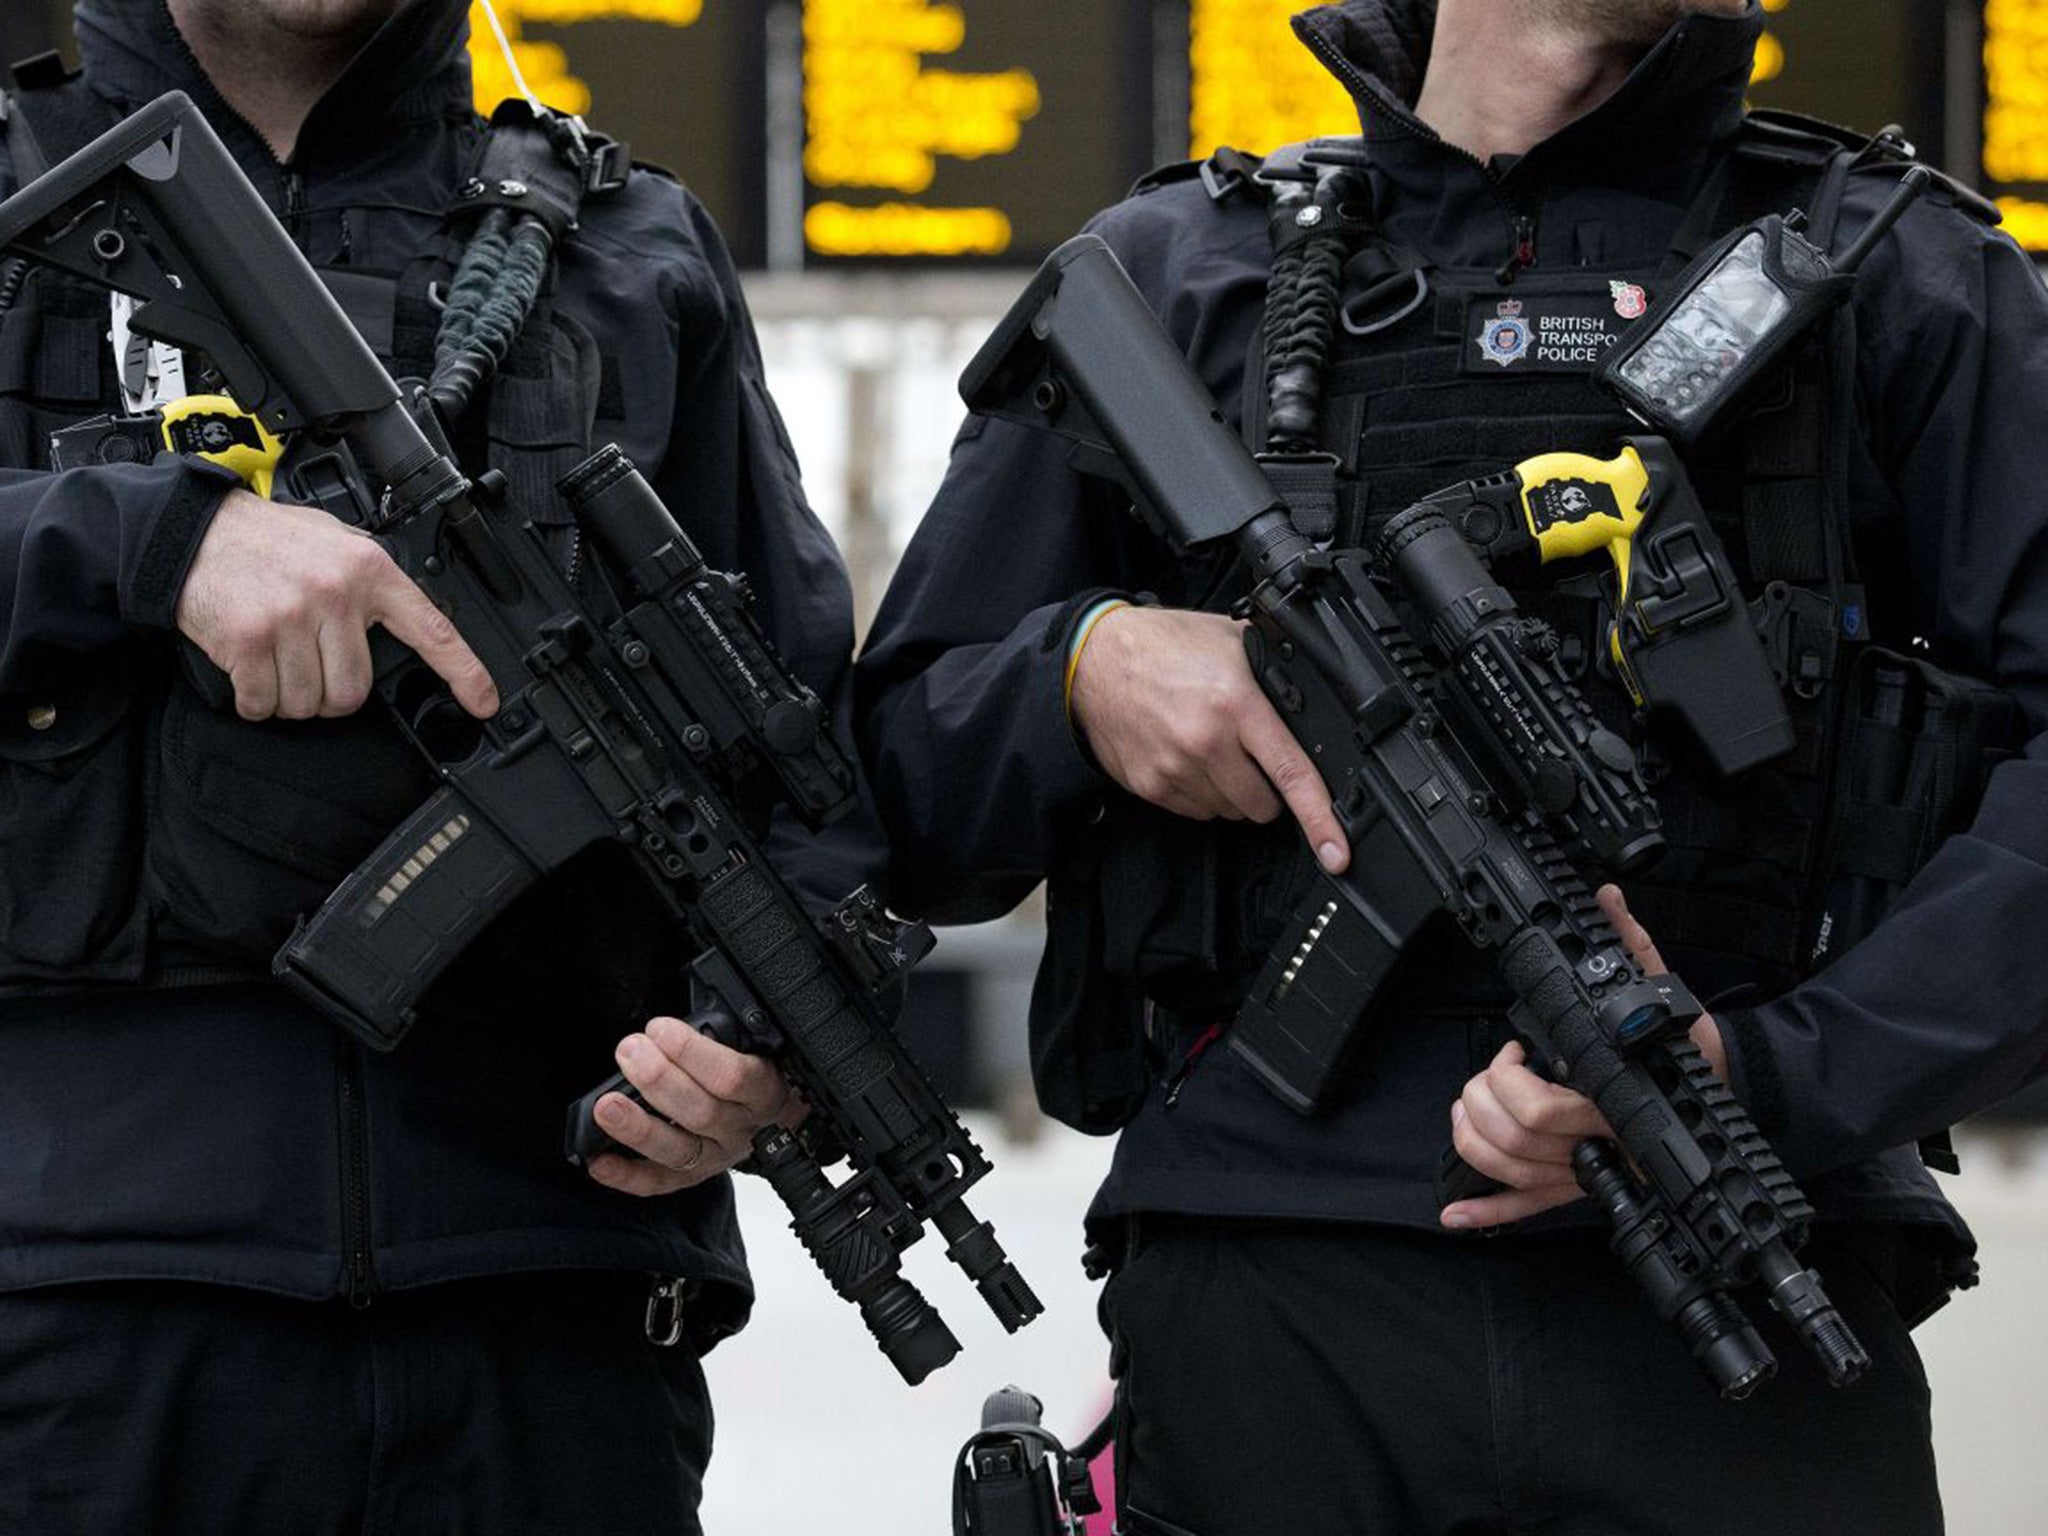 Armed officers from the British Transport Police patrol as part of Counter Terrorism Awareness Week